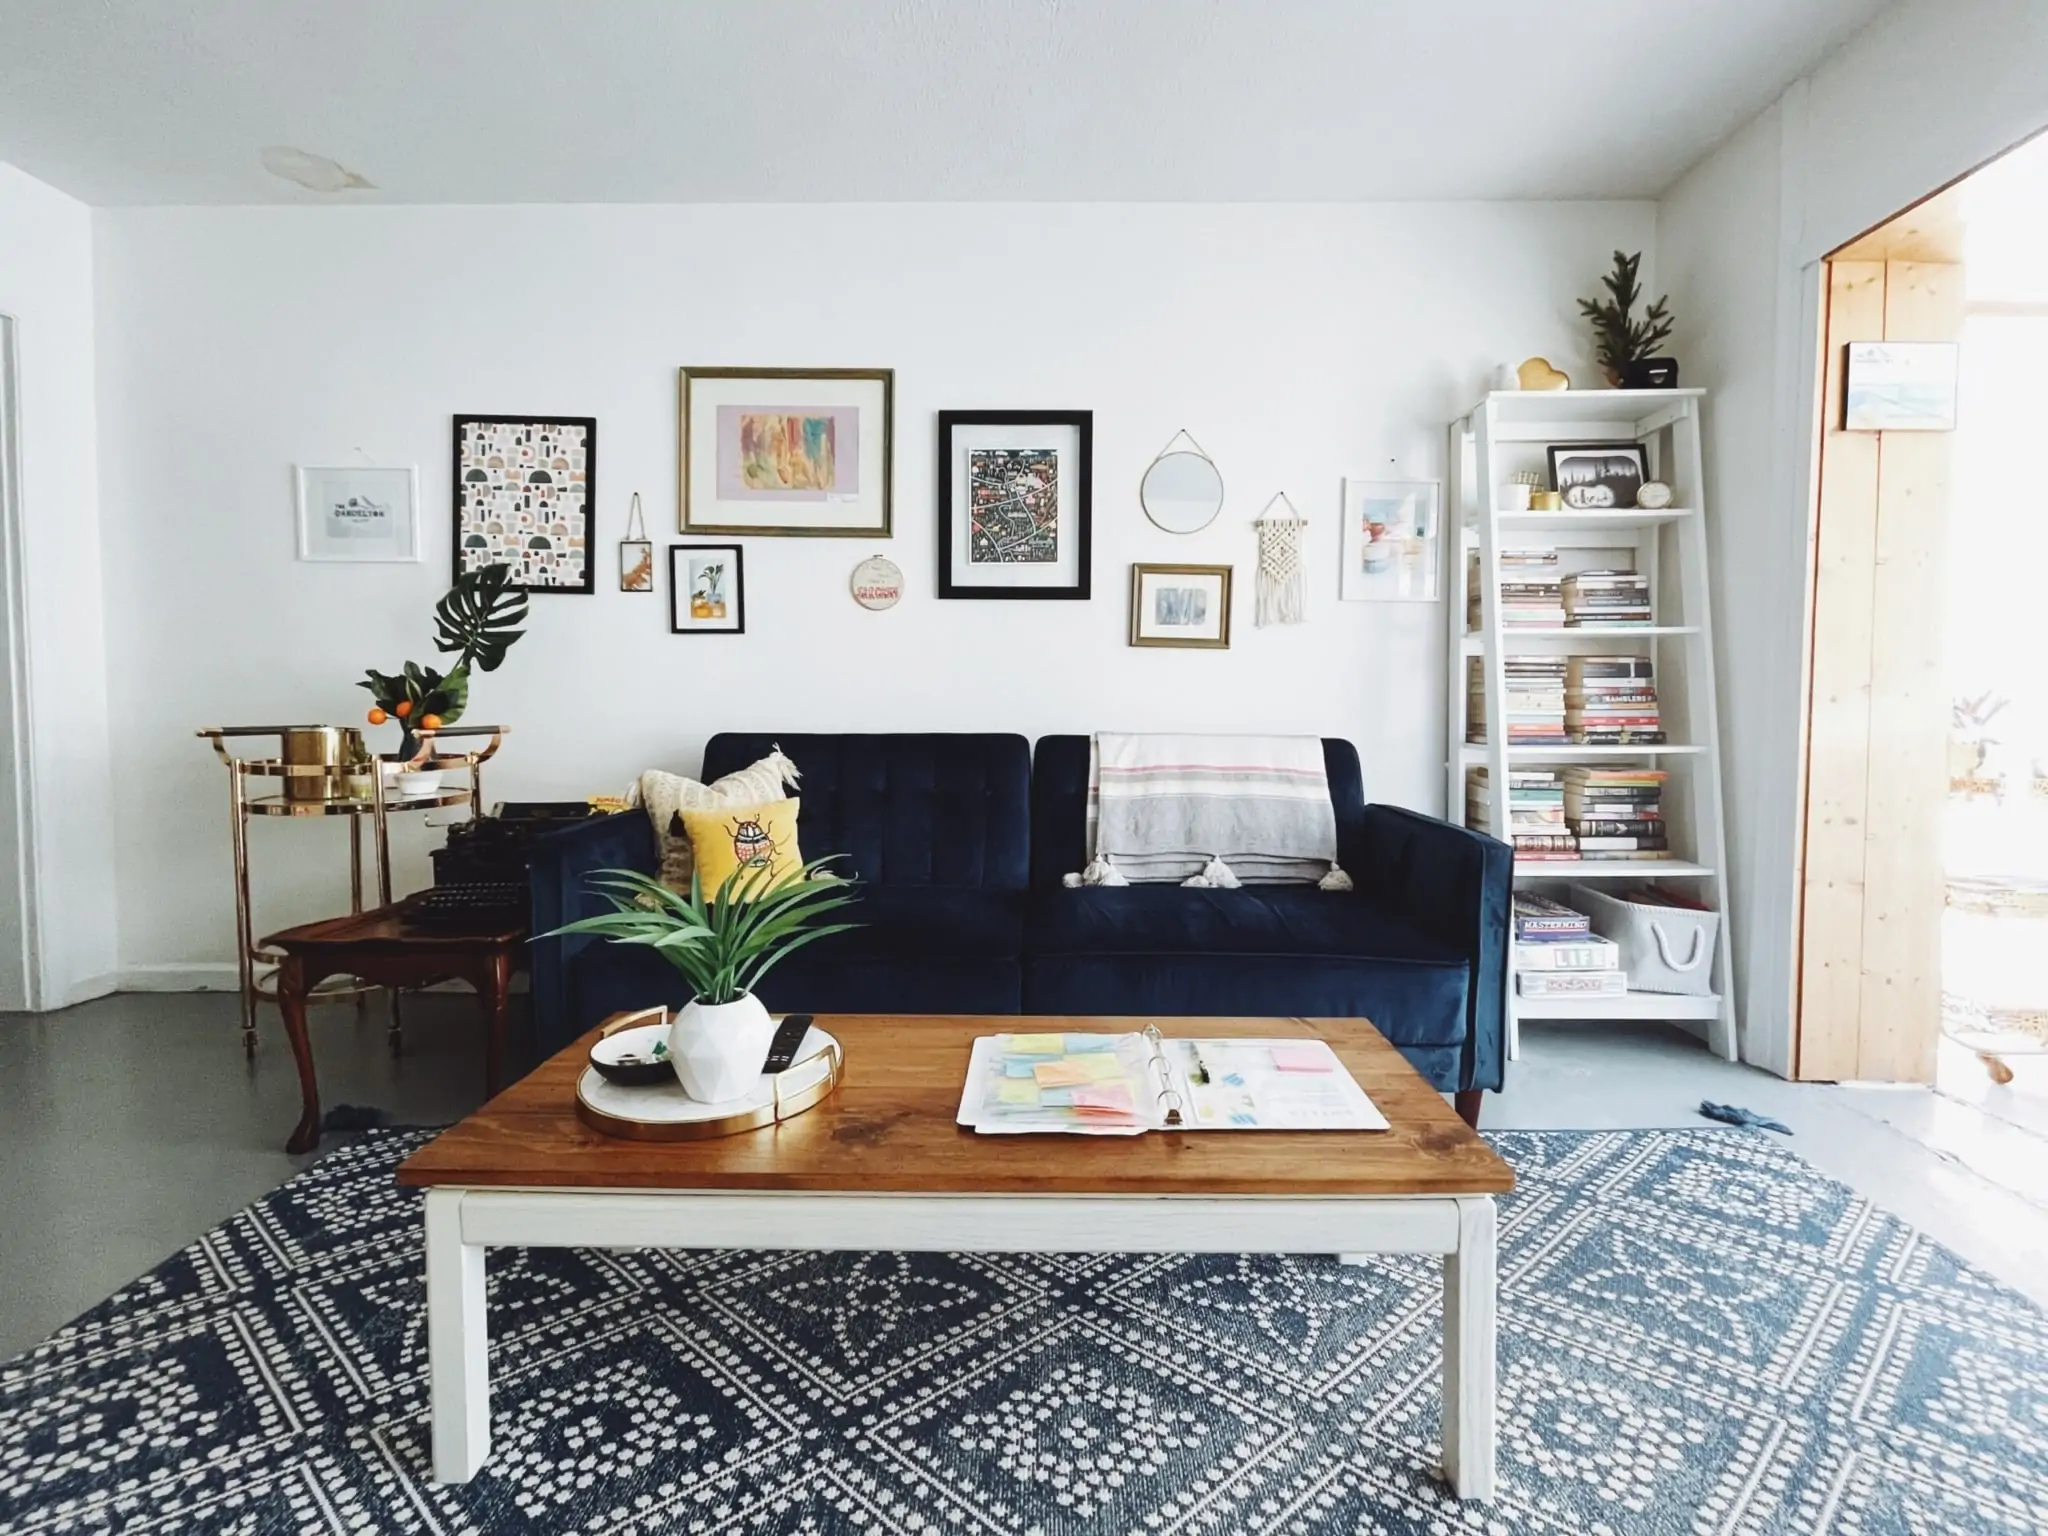 How to Turn Your Home Into an Airbnb in 19 Steps